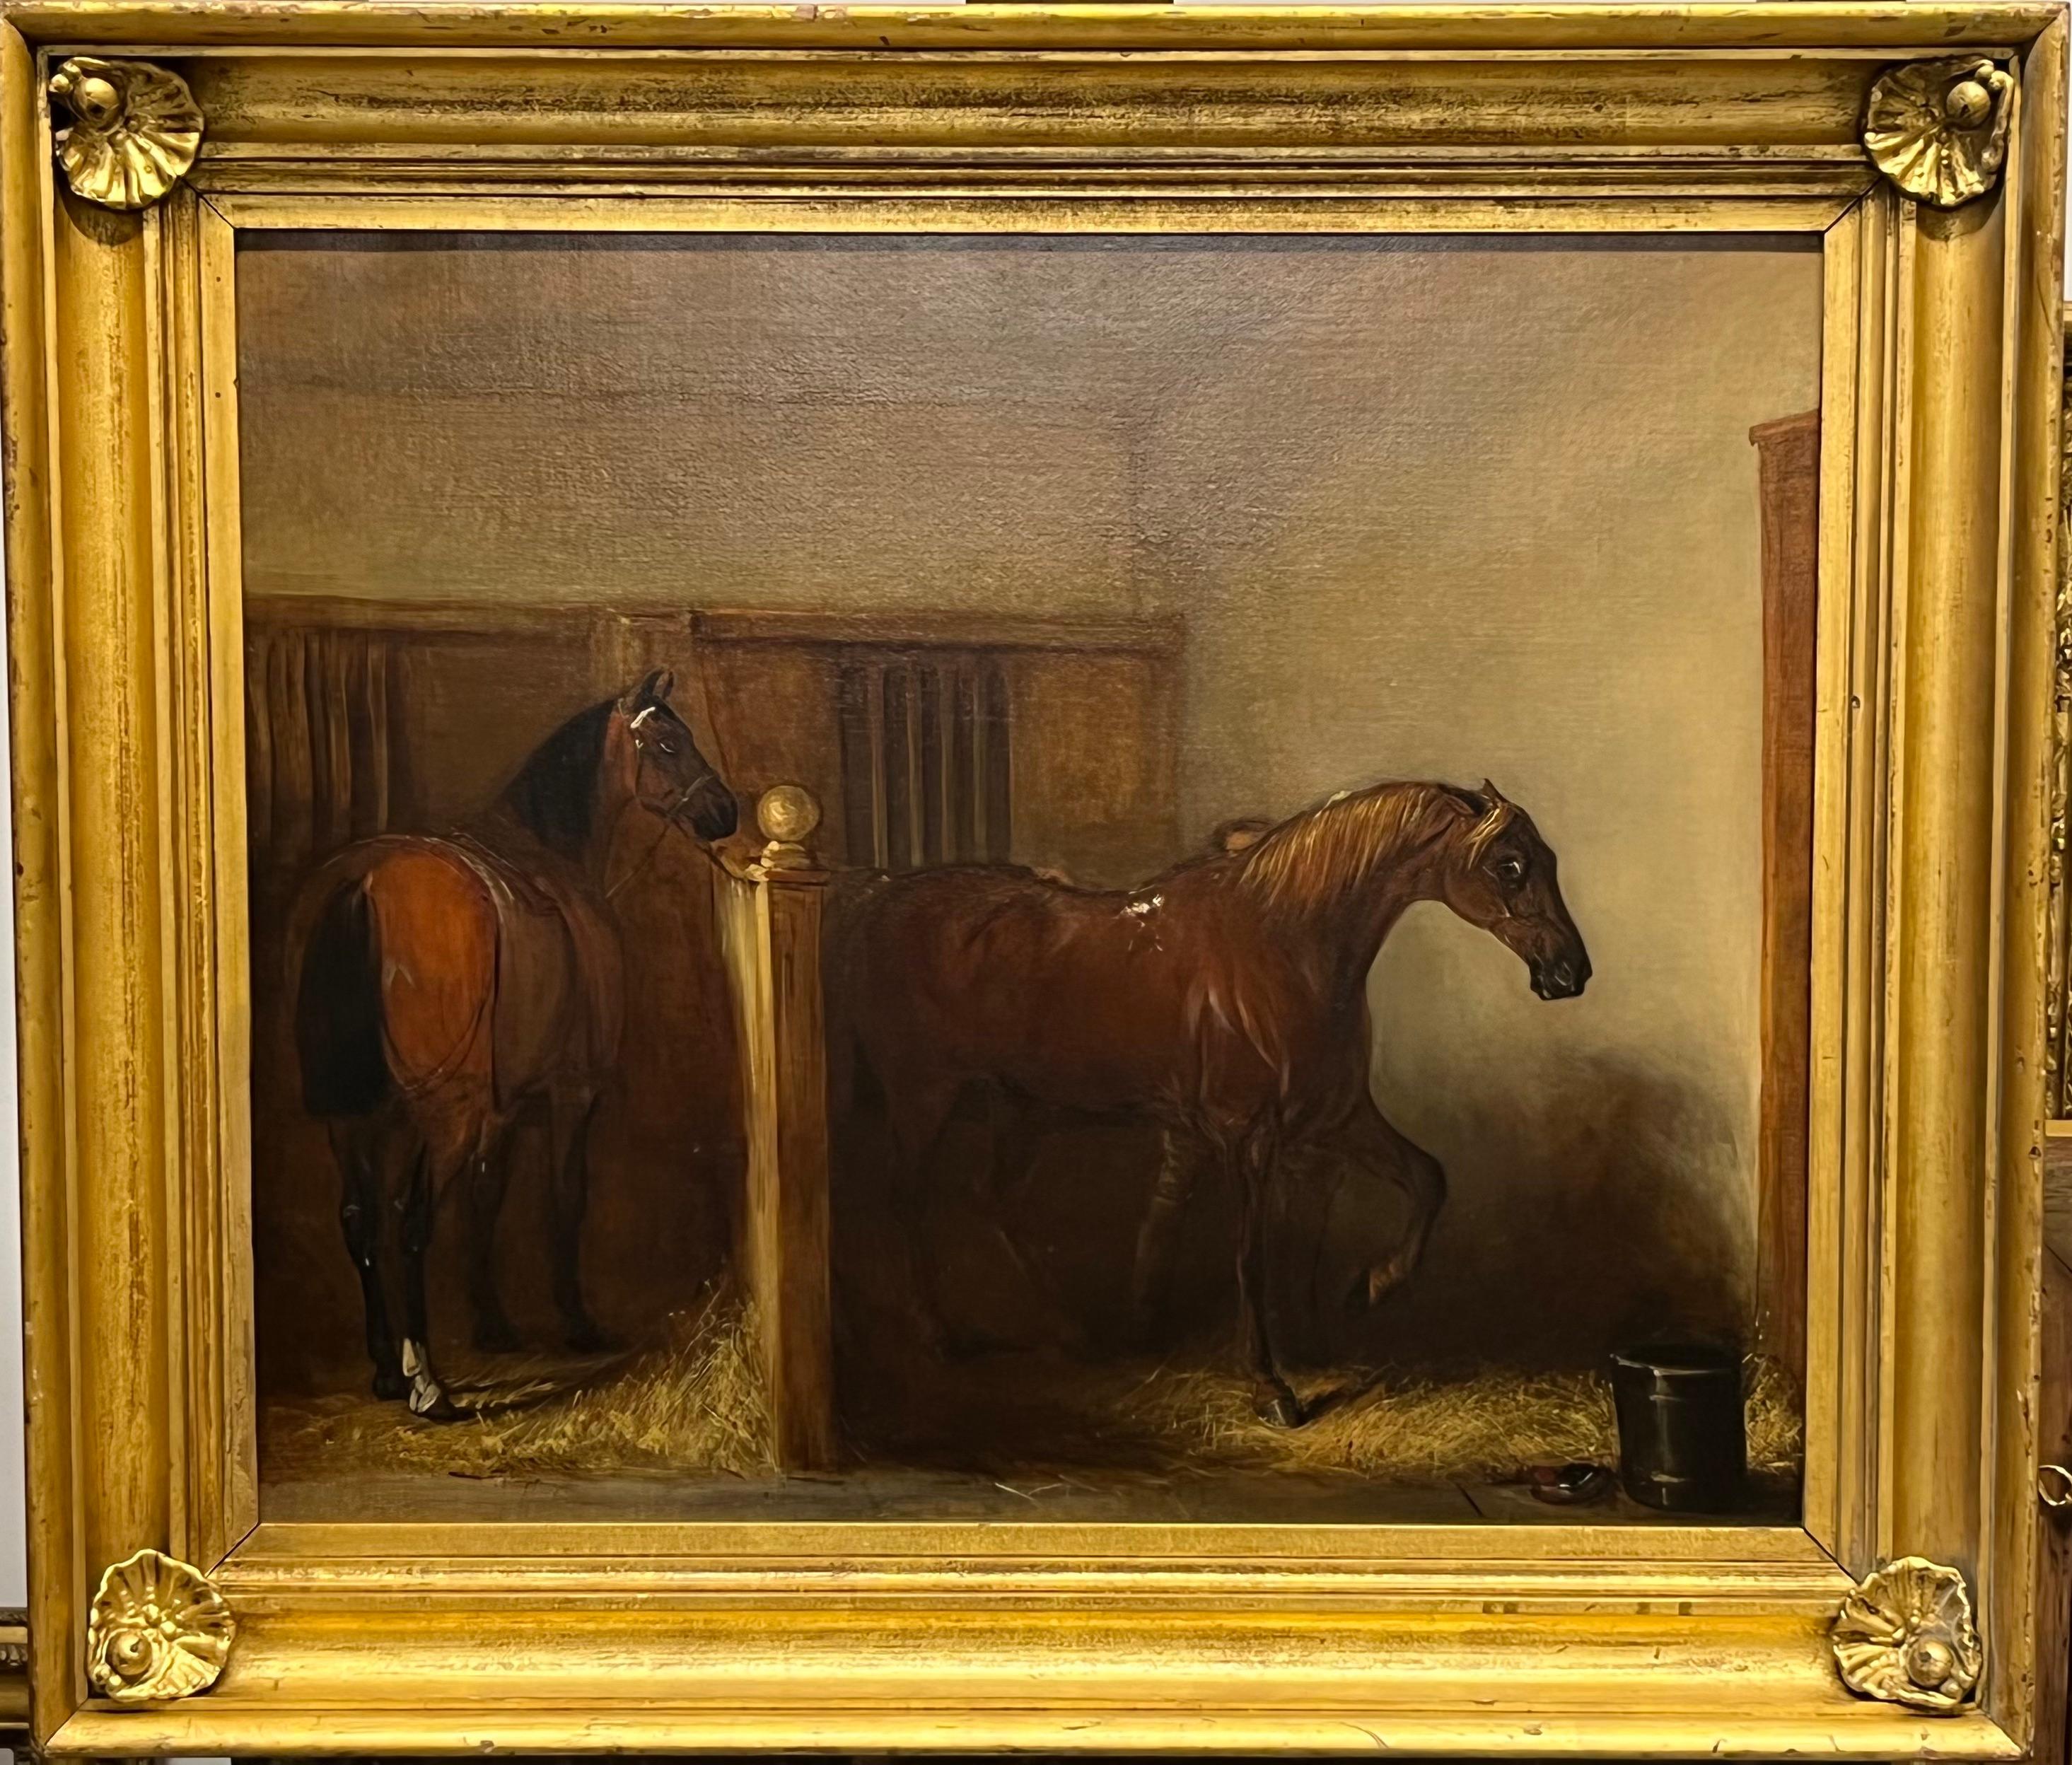 comment on the piece of realism in a horse and two goats